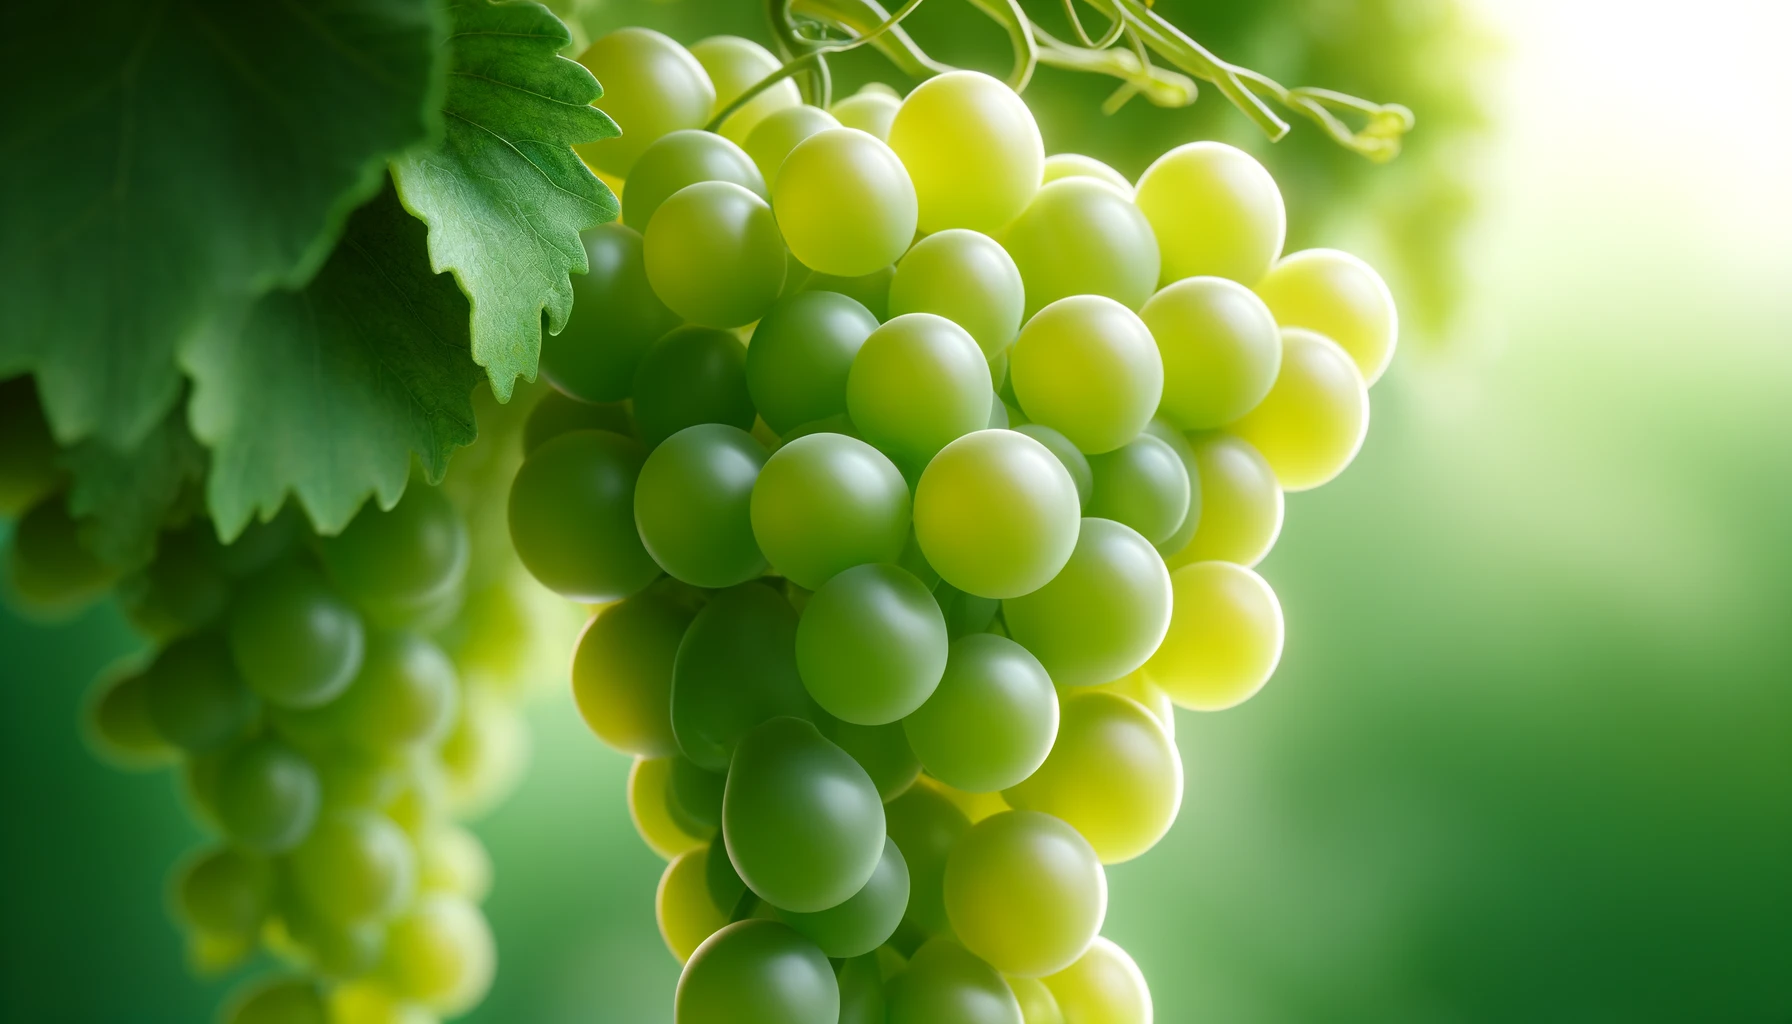 DALL·E 2024-05-23 10.26.16 - Photorealistic stock image of Albariño grapes, closely focused on a cluster of ripe Albariño grapes with vibrant, light green skins.